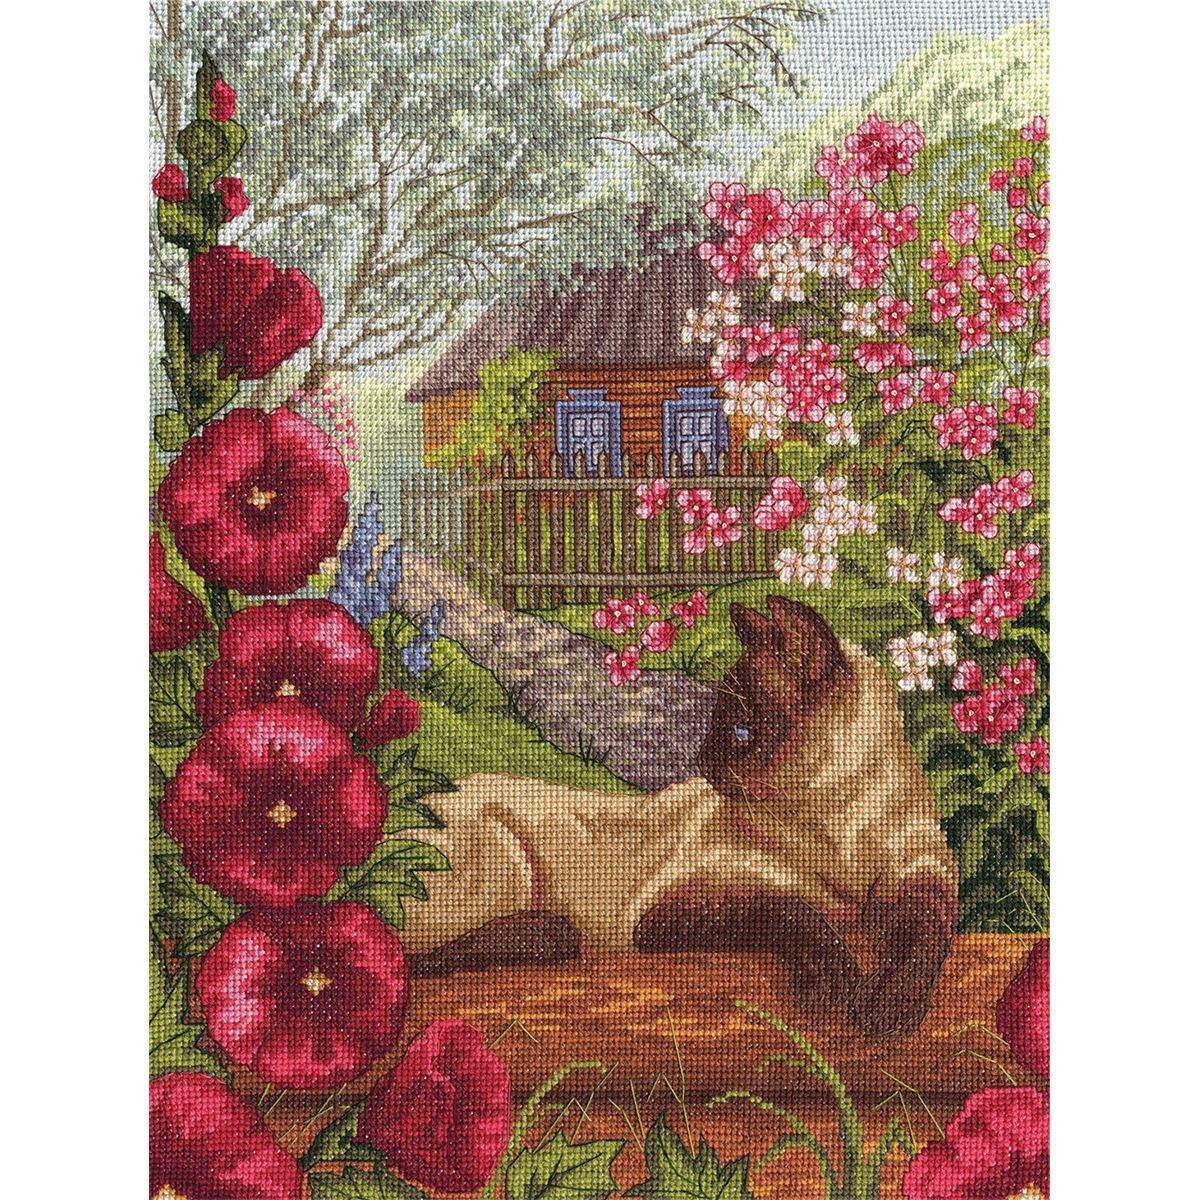 Panna counted cross stitch kit  "Rest in...